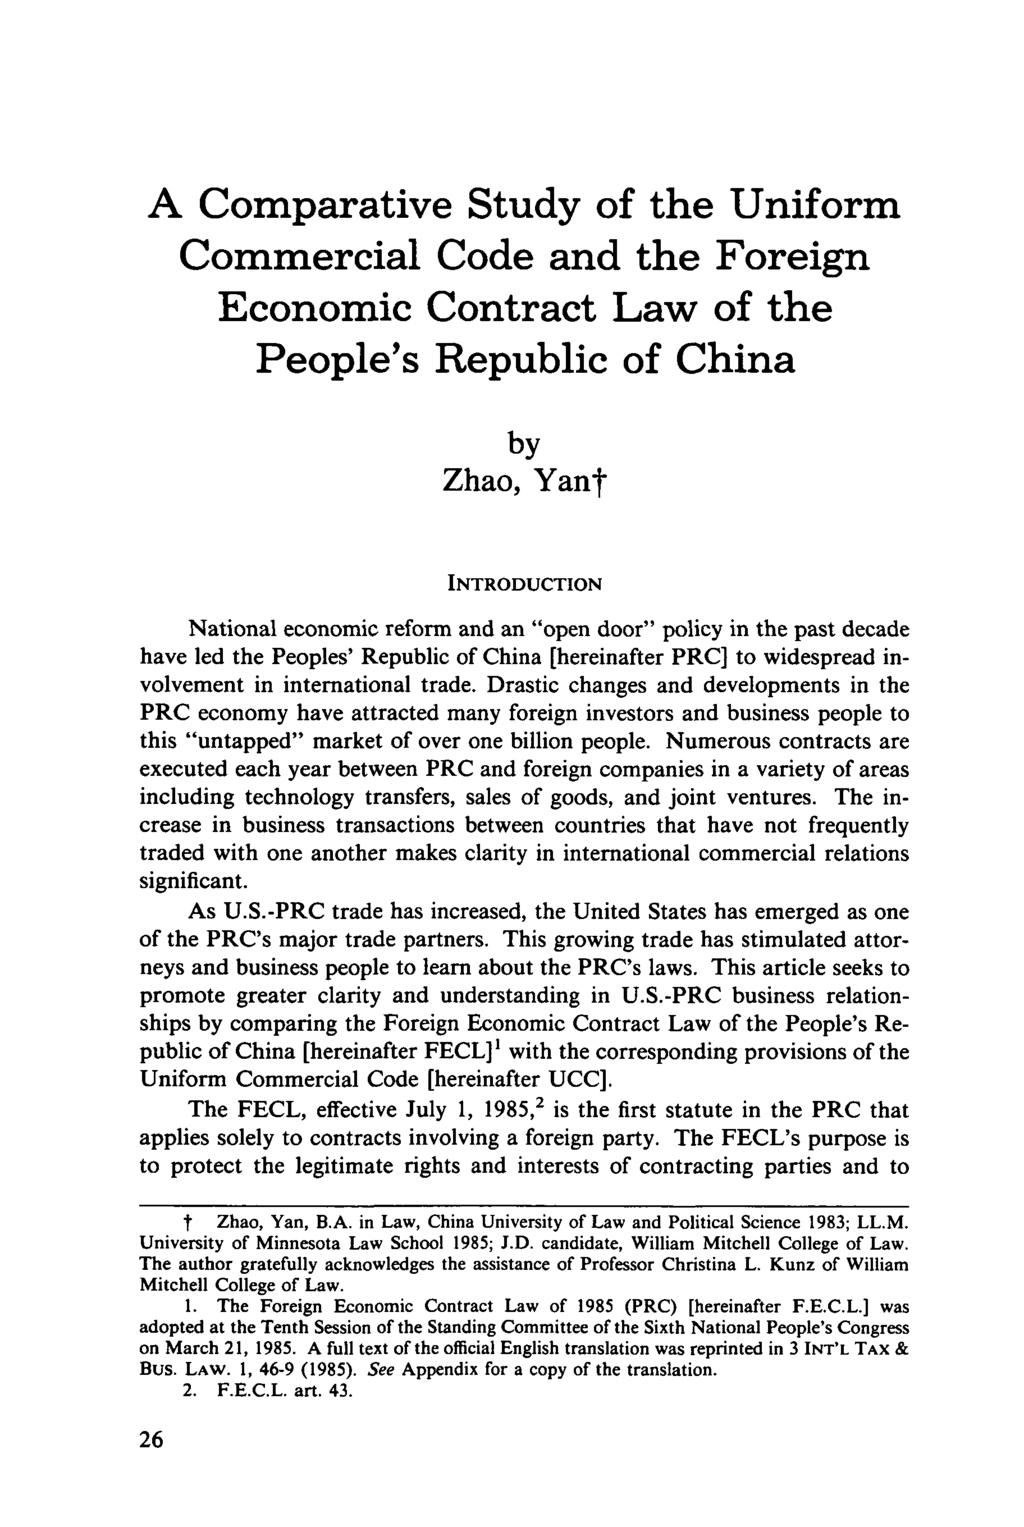 A Comparative Study of the Uniform Commercial Code and the Foreign Economic Contract Law of the People's Republic of China by Zhao, Yant INTRODUCTION National economic reform and an "open door"